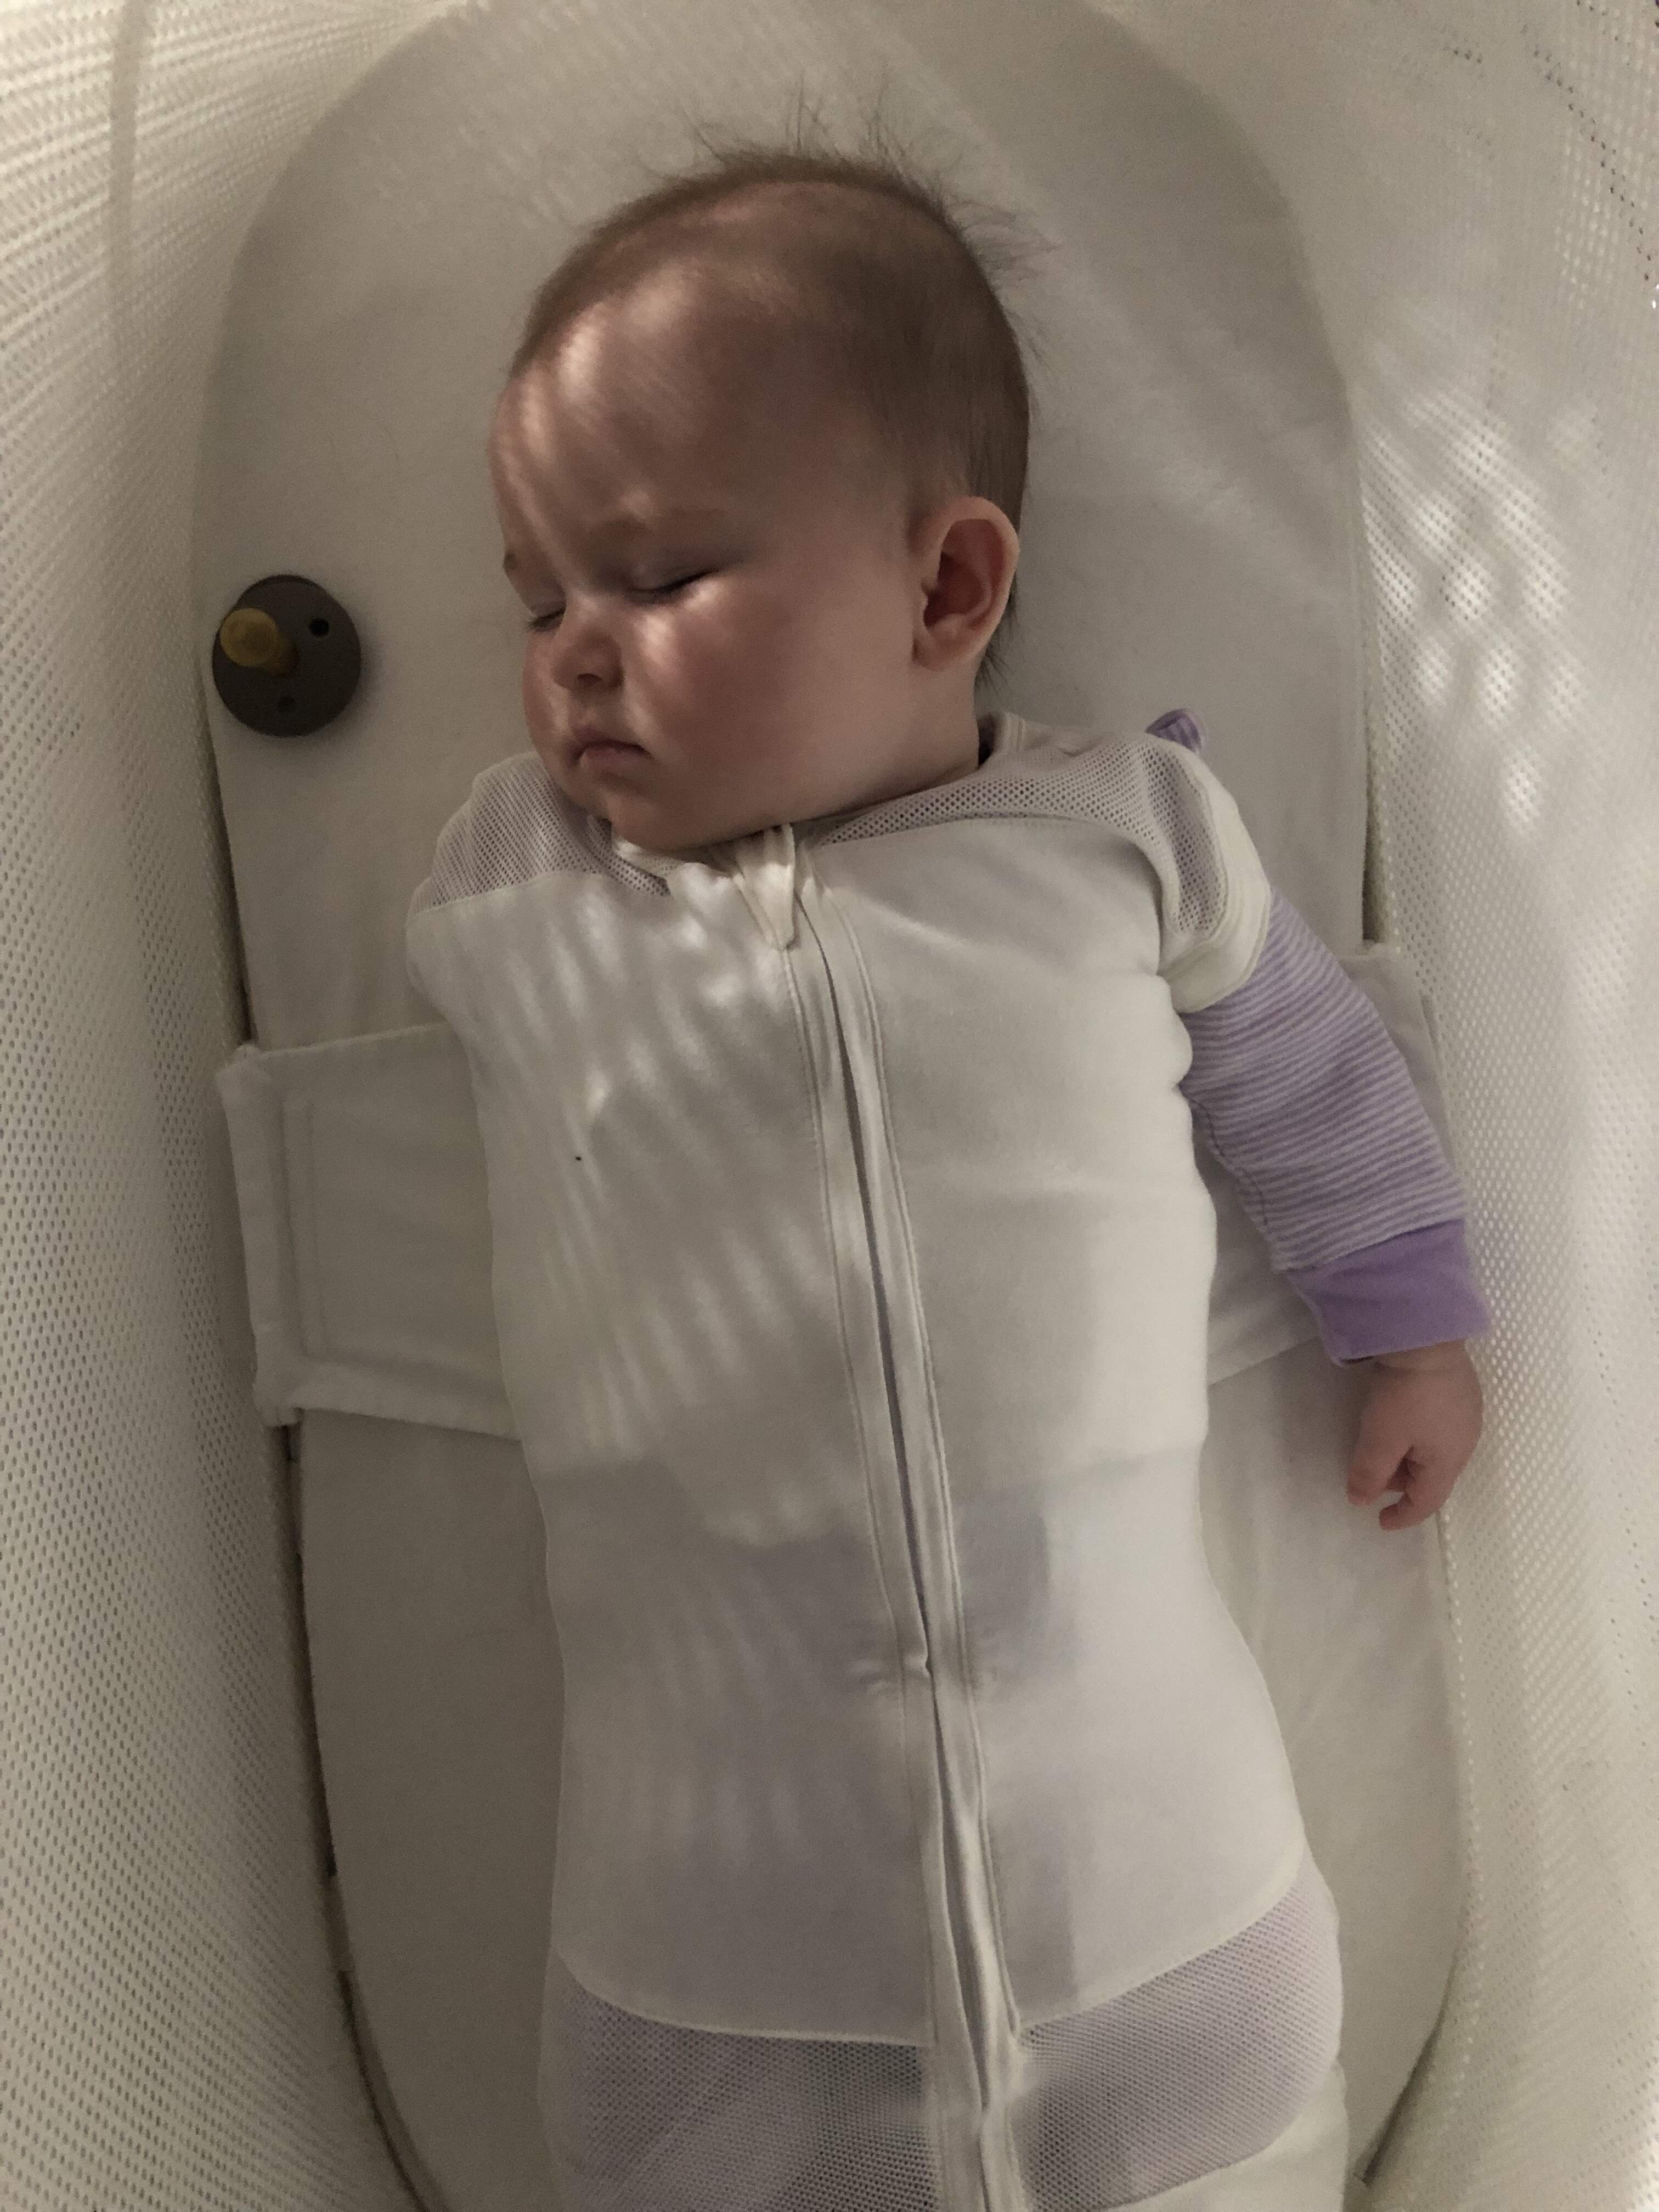 snoo swaddle arms up